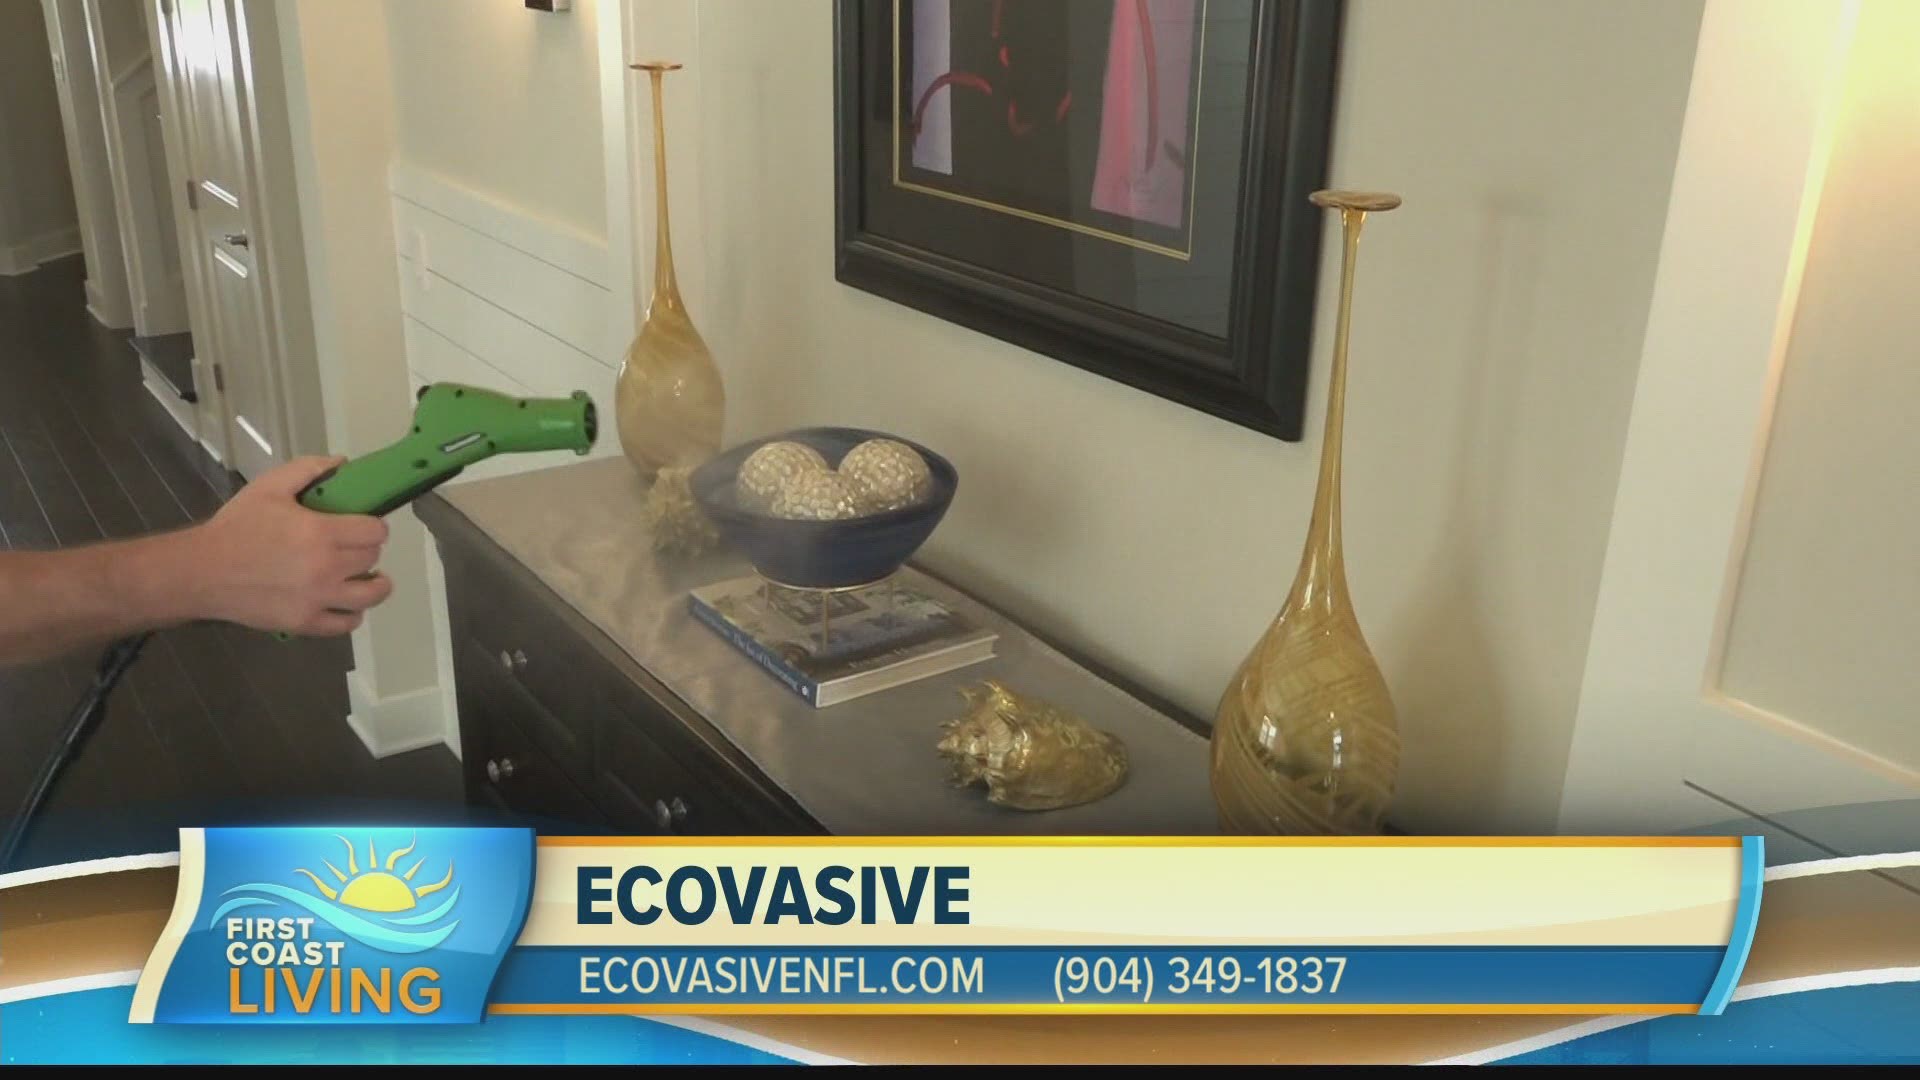 Stop germs and viruses in their tracks with the help of Ecovasive of North Florida